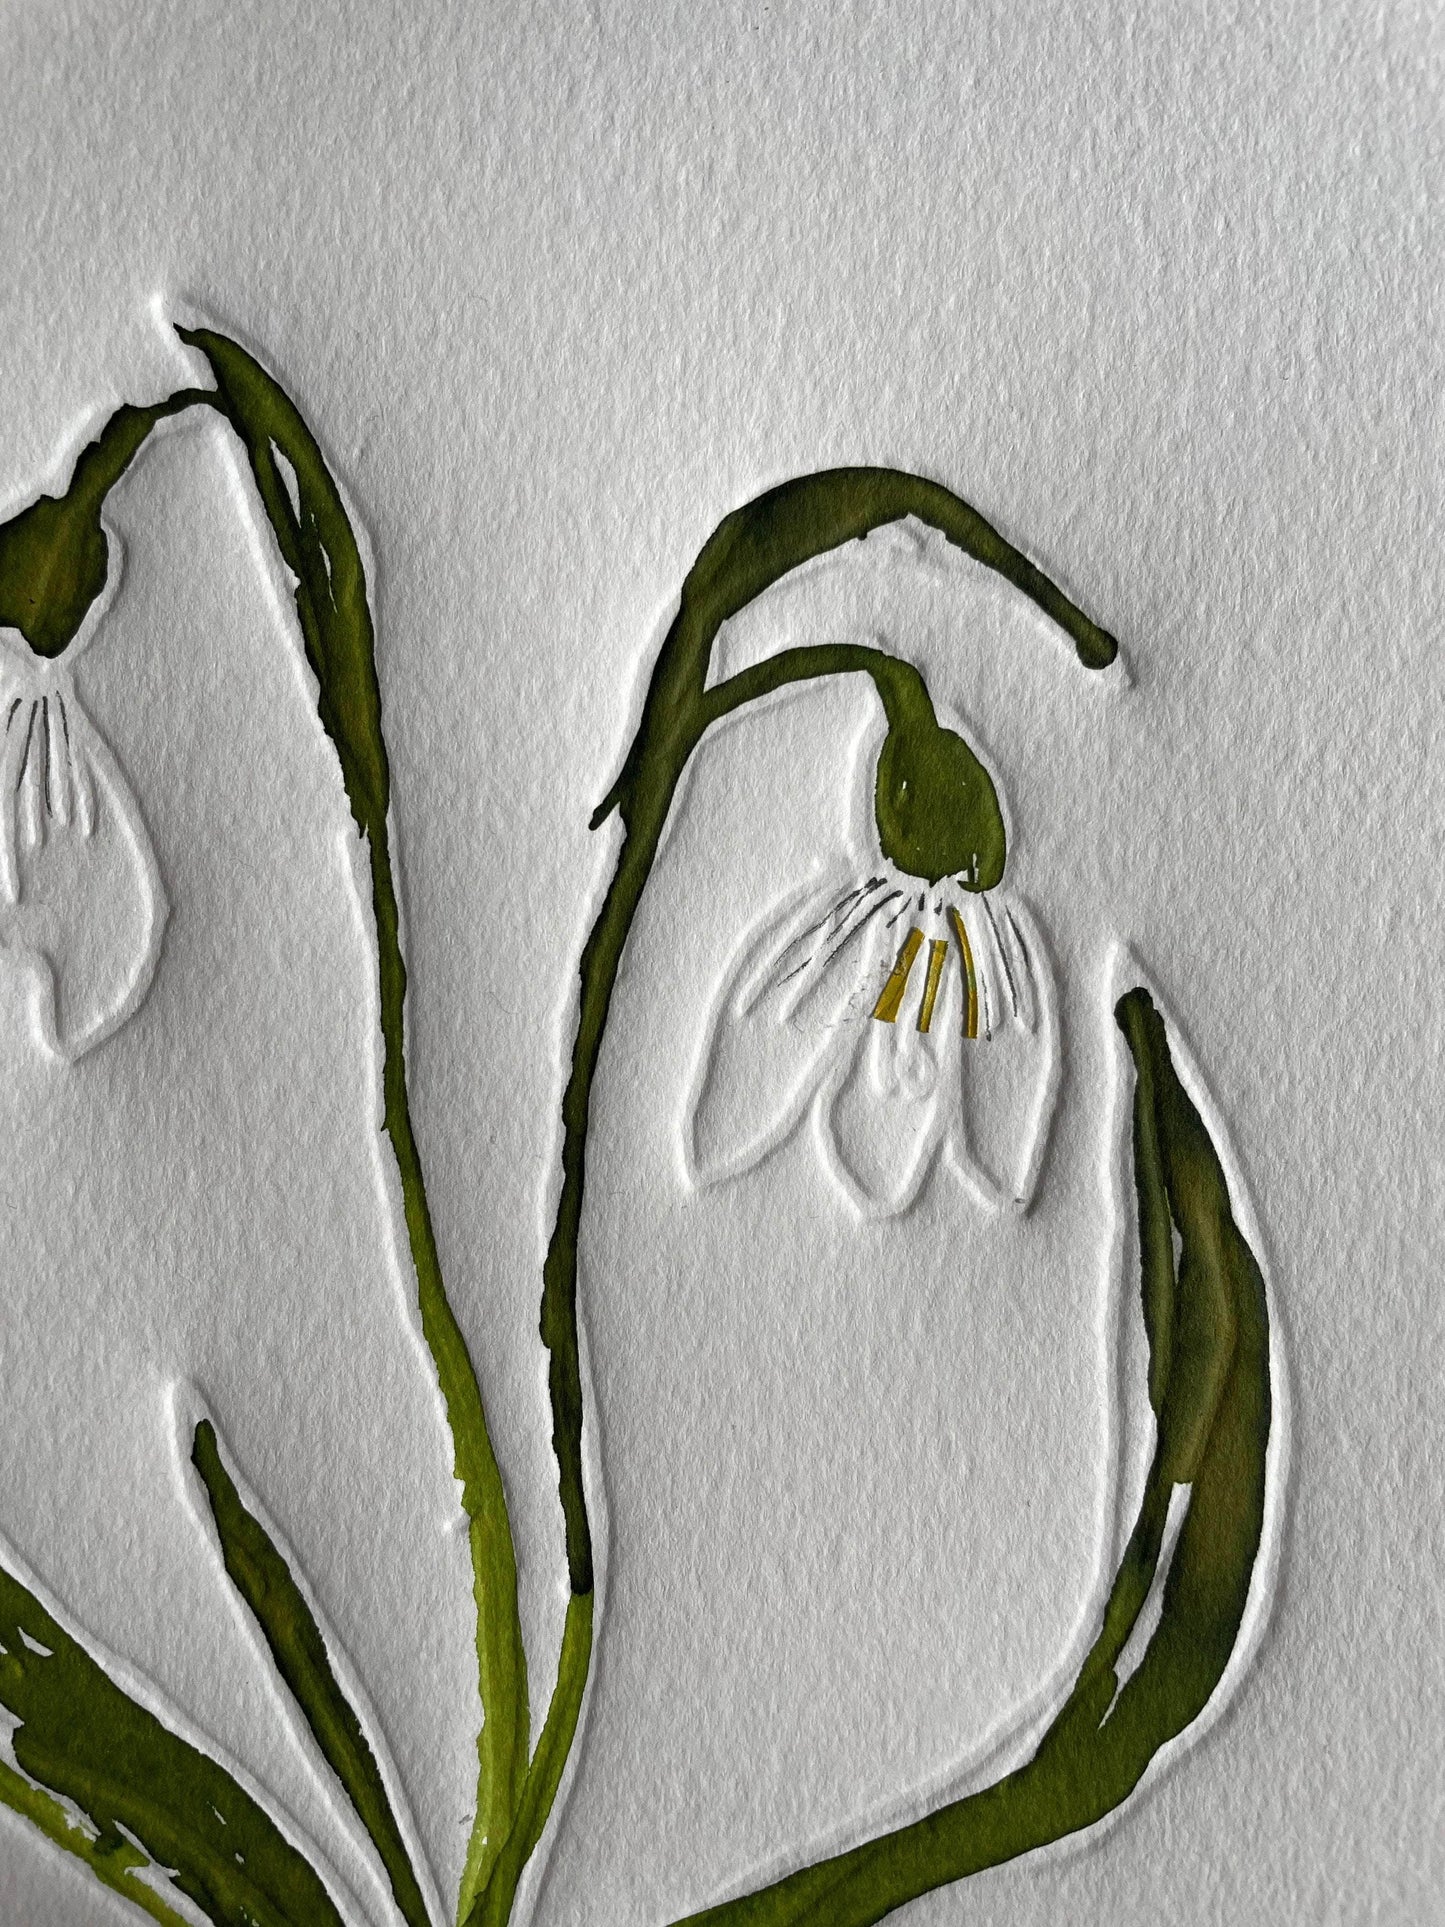 "Snowdrop Flower of the Month" Embossed Art Collage